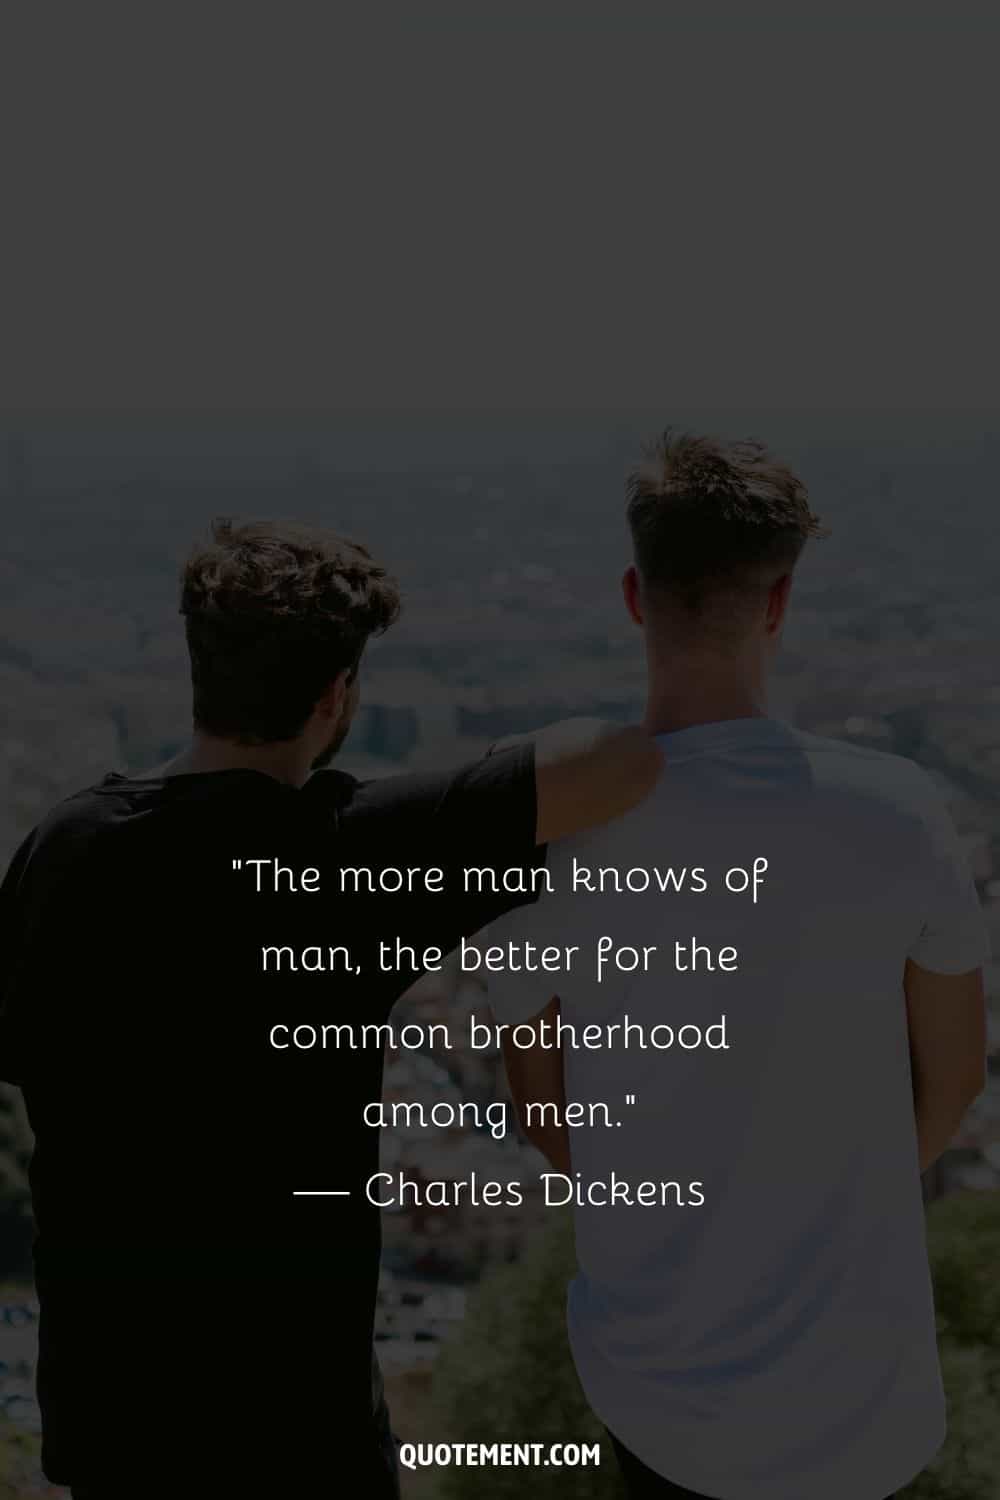 “The more man knows of man, the better for the common brotherhood among men.” — Charles Dickens